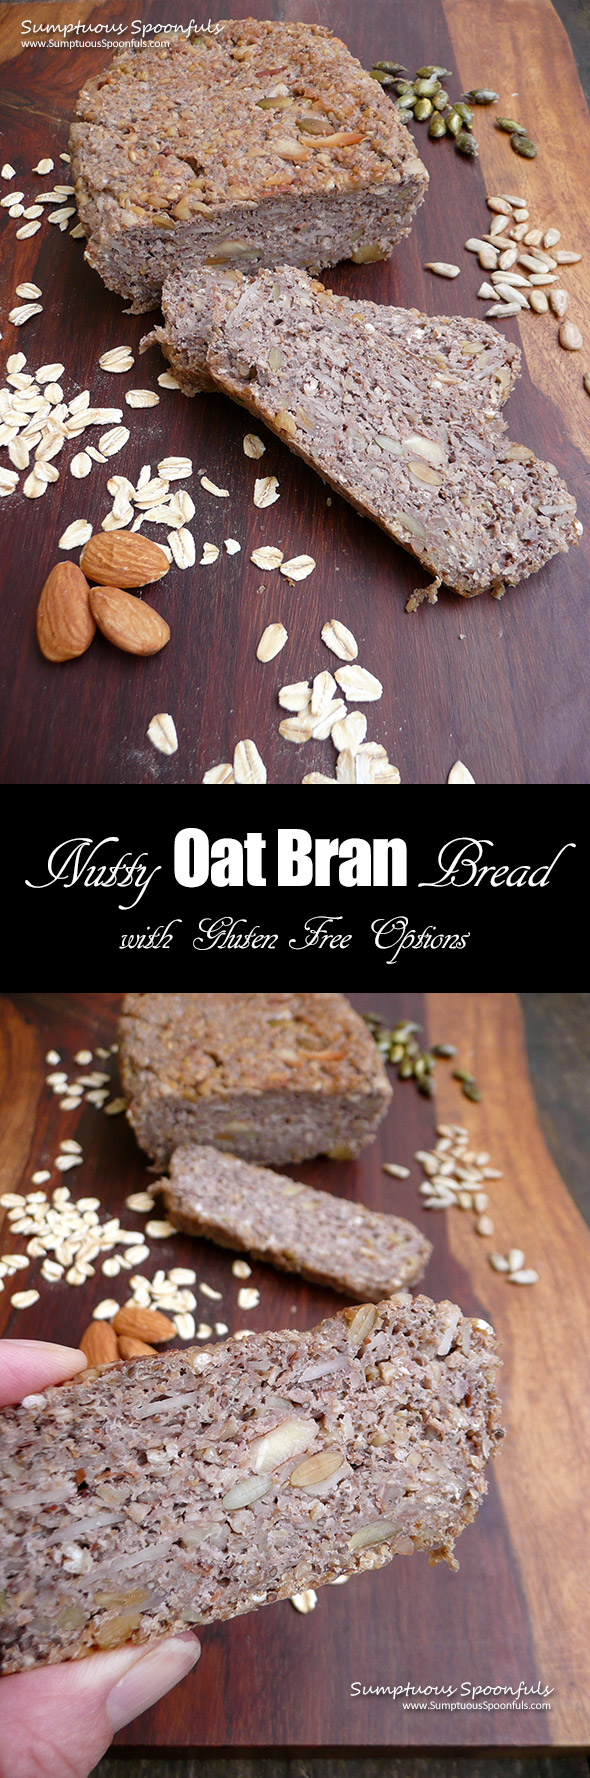 Nutty Oat Bran Bread ~ Hearty oat bran with lots of nuts and seeds, this bread is like nothing you've ever tried before! Perfect for avocado toast or open-face sandwiches.